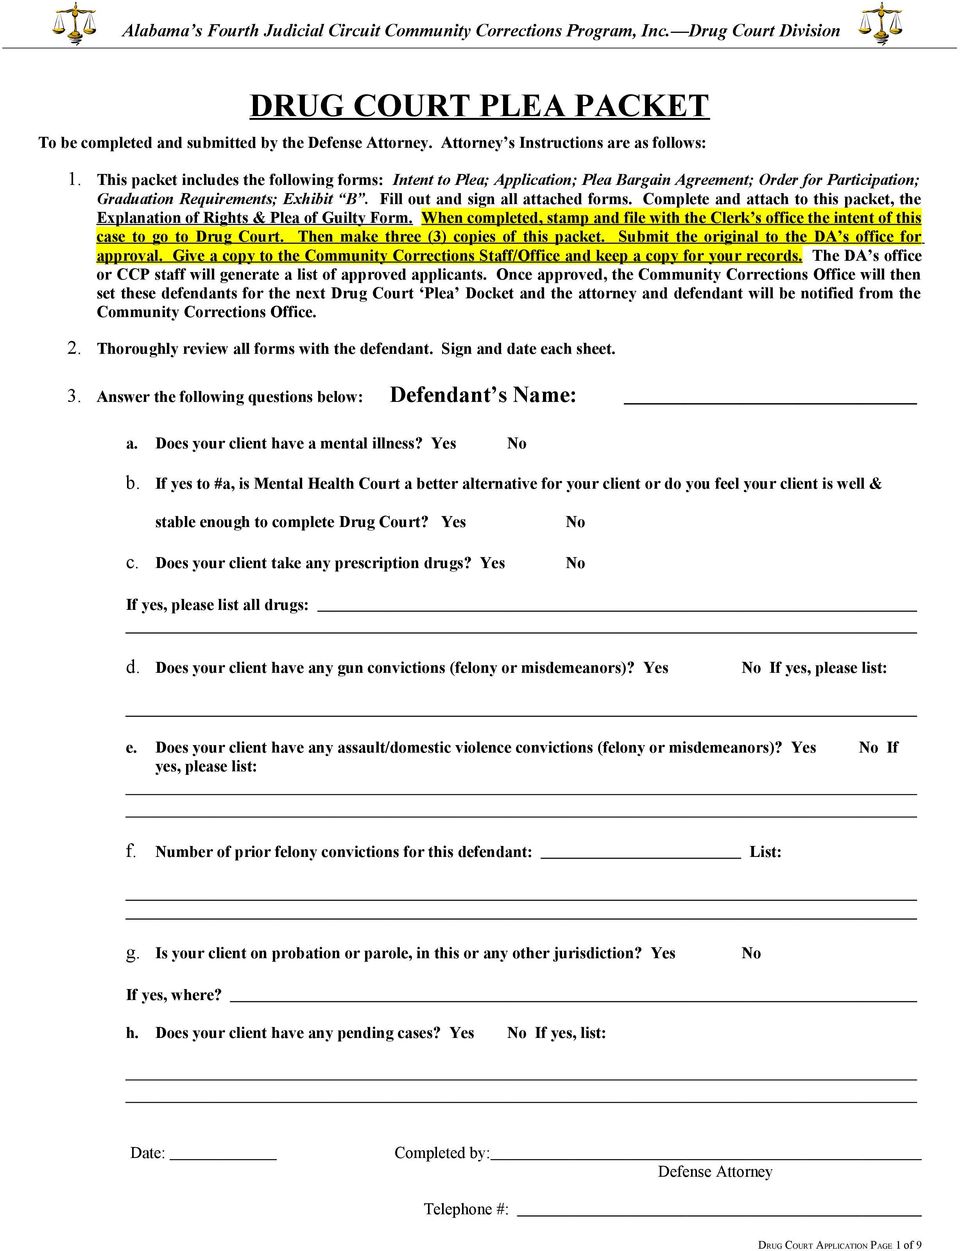 Complete and attach to this packet, the Explanation of Rights & Plea of Guilty Form. When completed, stamp and file with the Clerk s office the intent of this case to go to Drug Court.